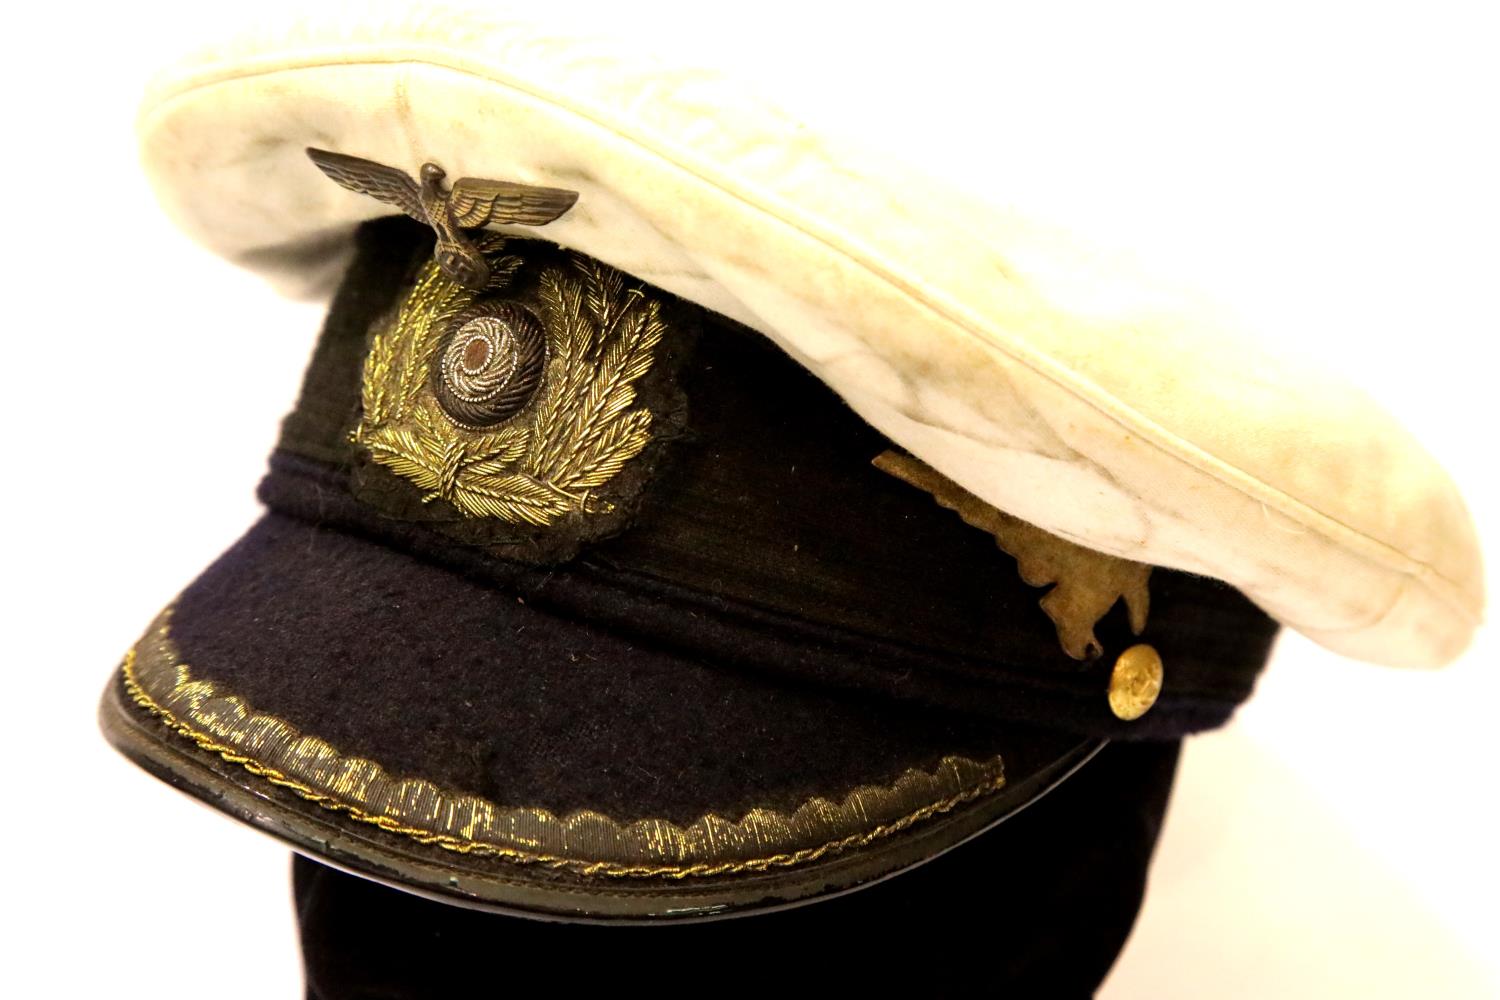 WWII German Kriegsmarine U-Boat Officers Cap. P&P Group 2 (£18+VAT for the first lot and £3+VAT